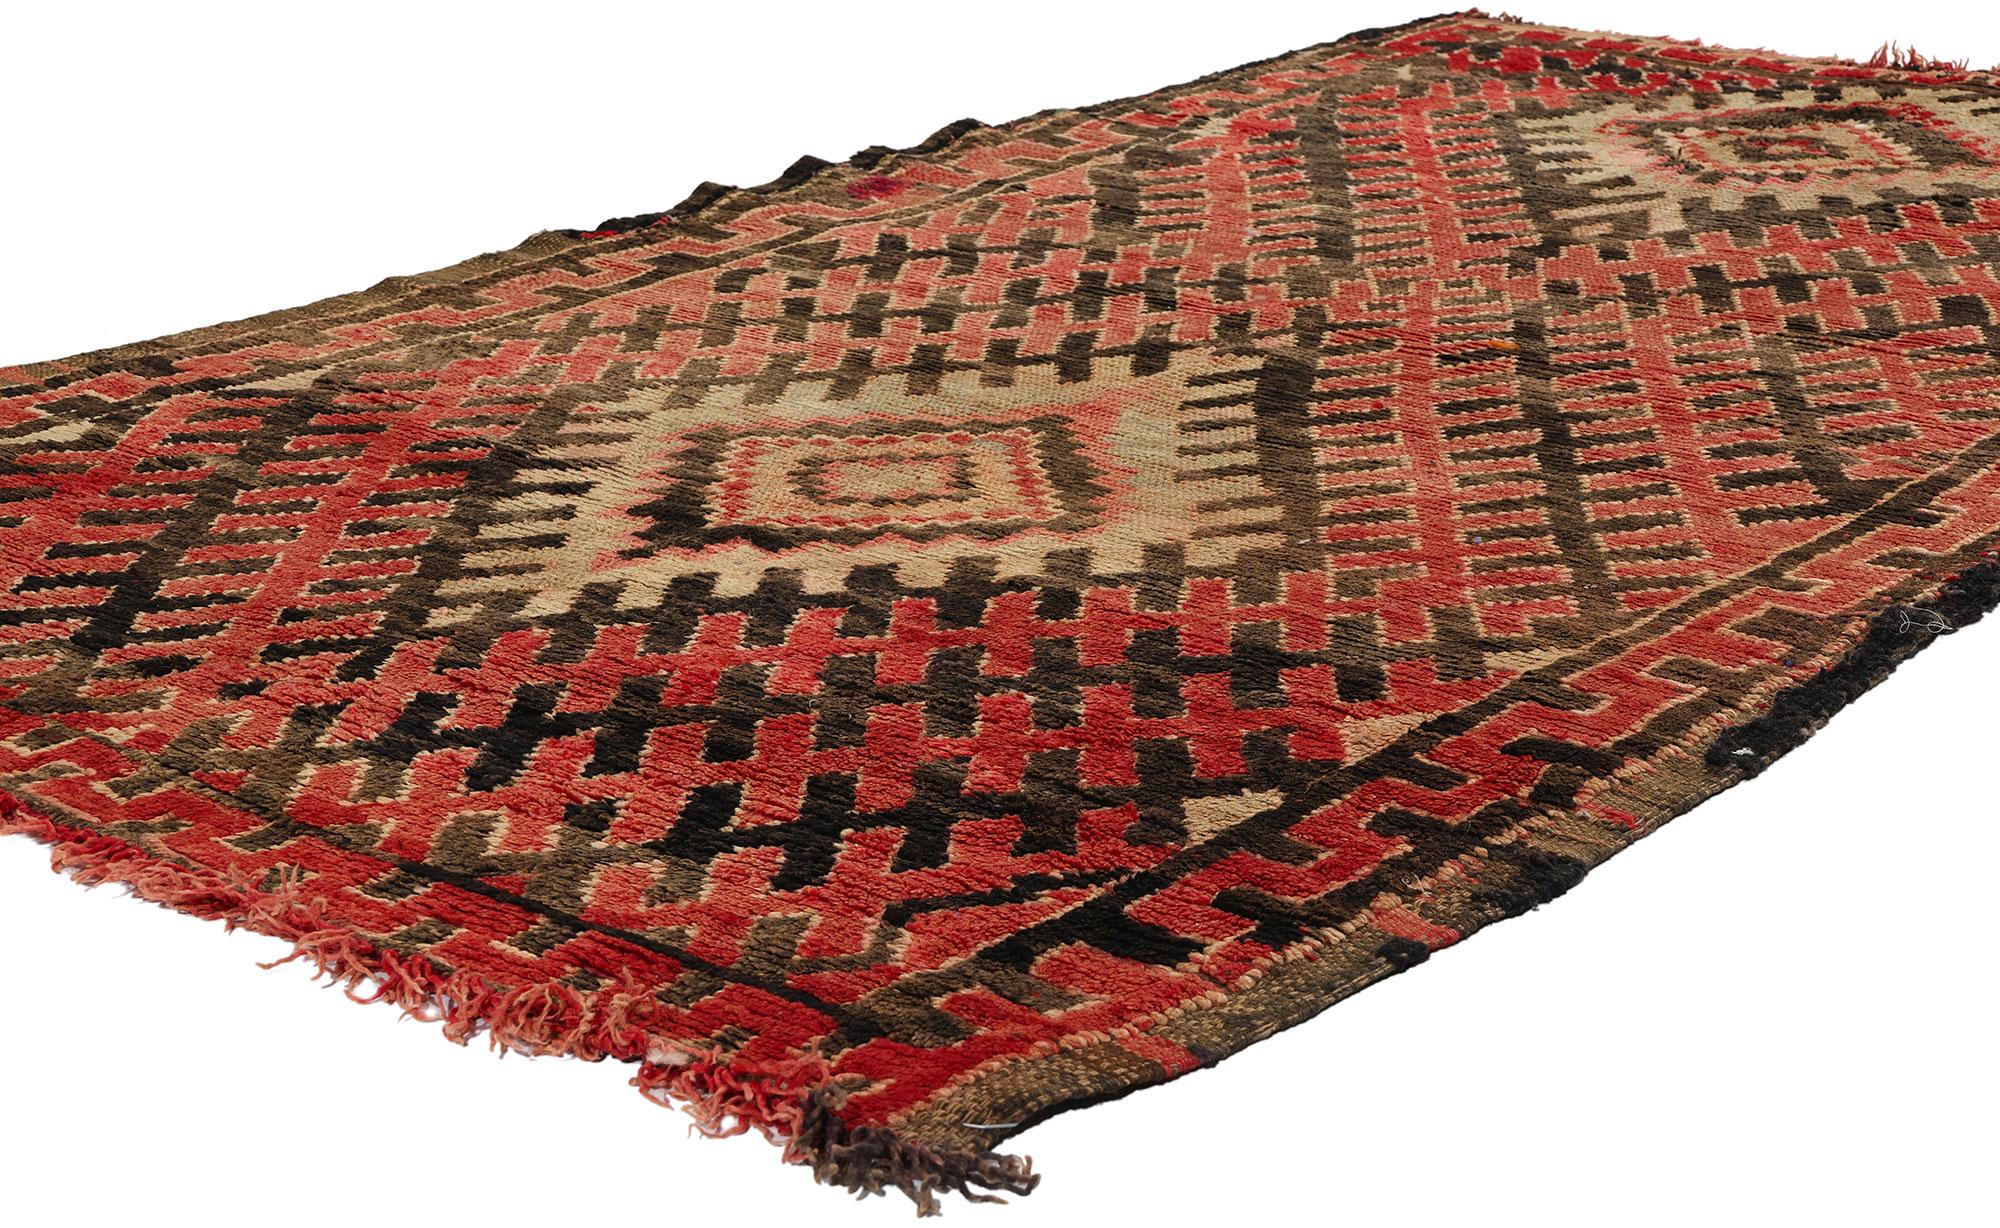 21762 Vintage Red Talsint Moroccan Rug, 03'10 x 06'11. ​From the heart of the Figuig province, where the Ait Bou Ichaouen tribe resides, emerges the Talsint Moroccan rug, named after the rural town of Talsint in Northeastern Morocco, renowned for